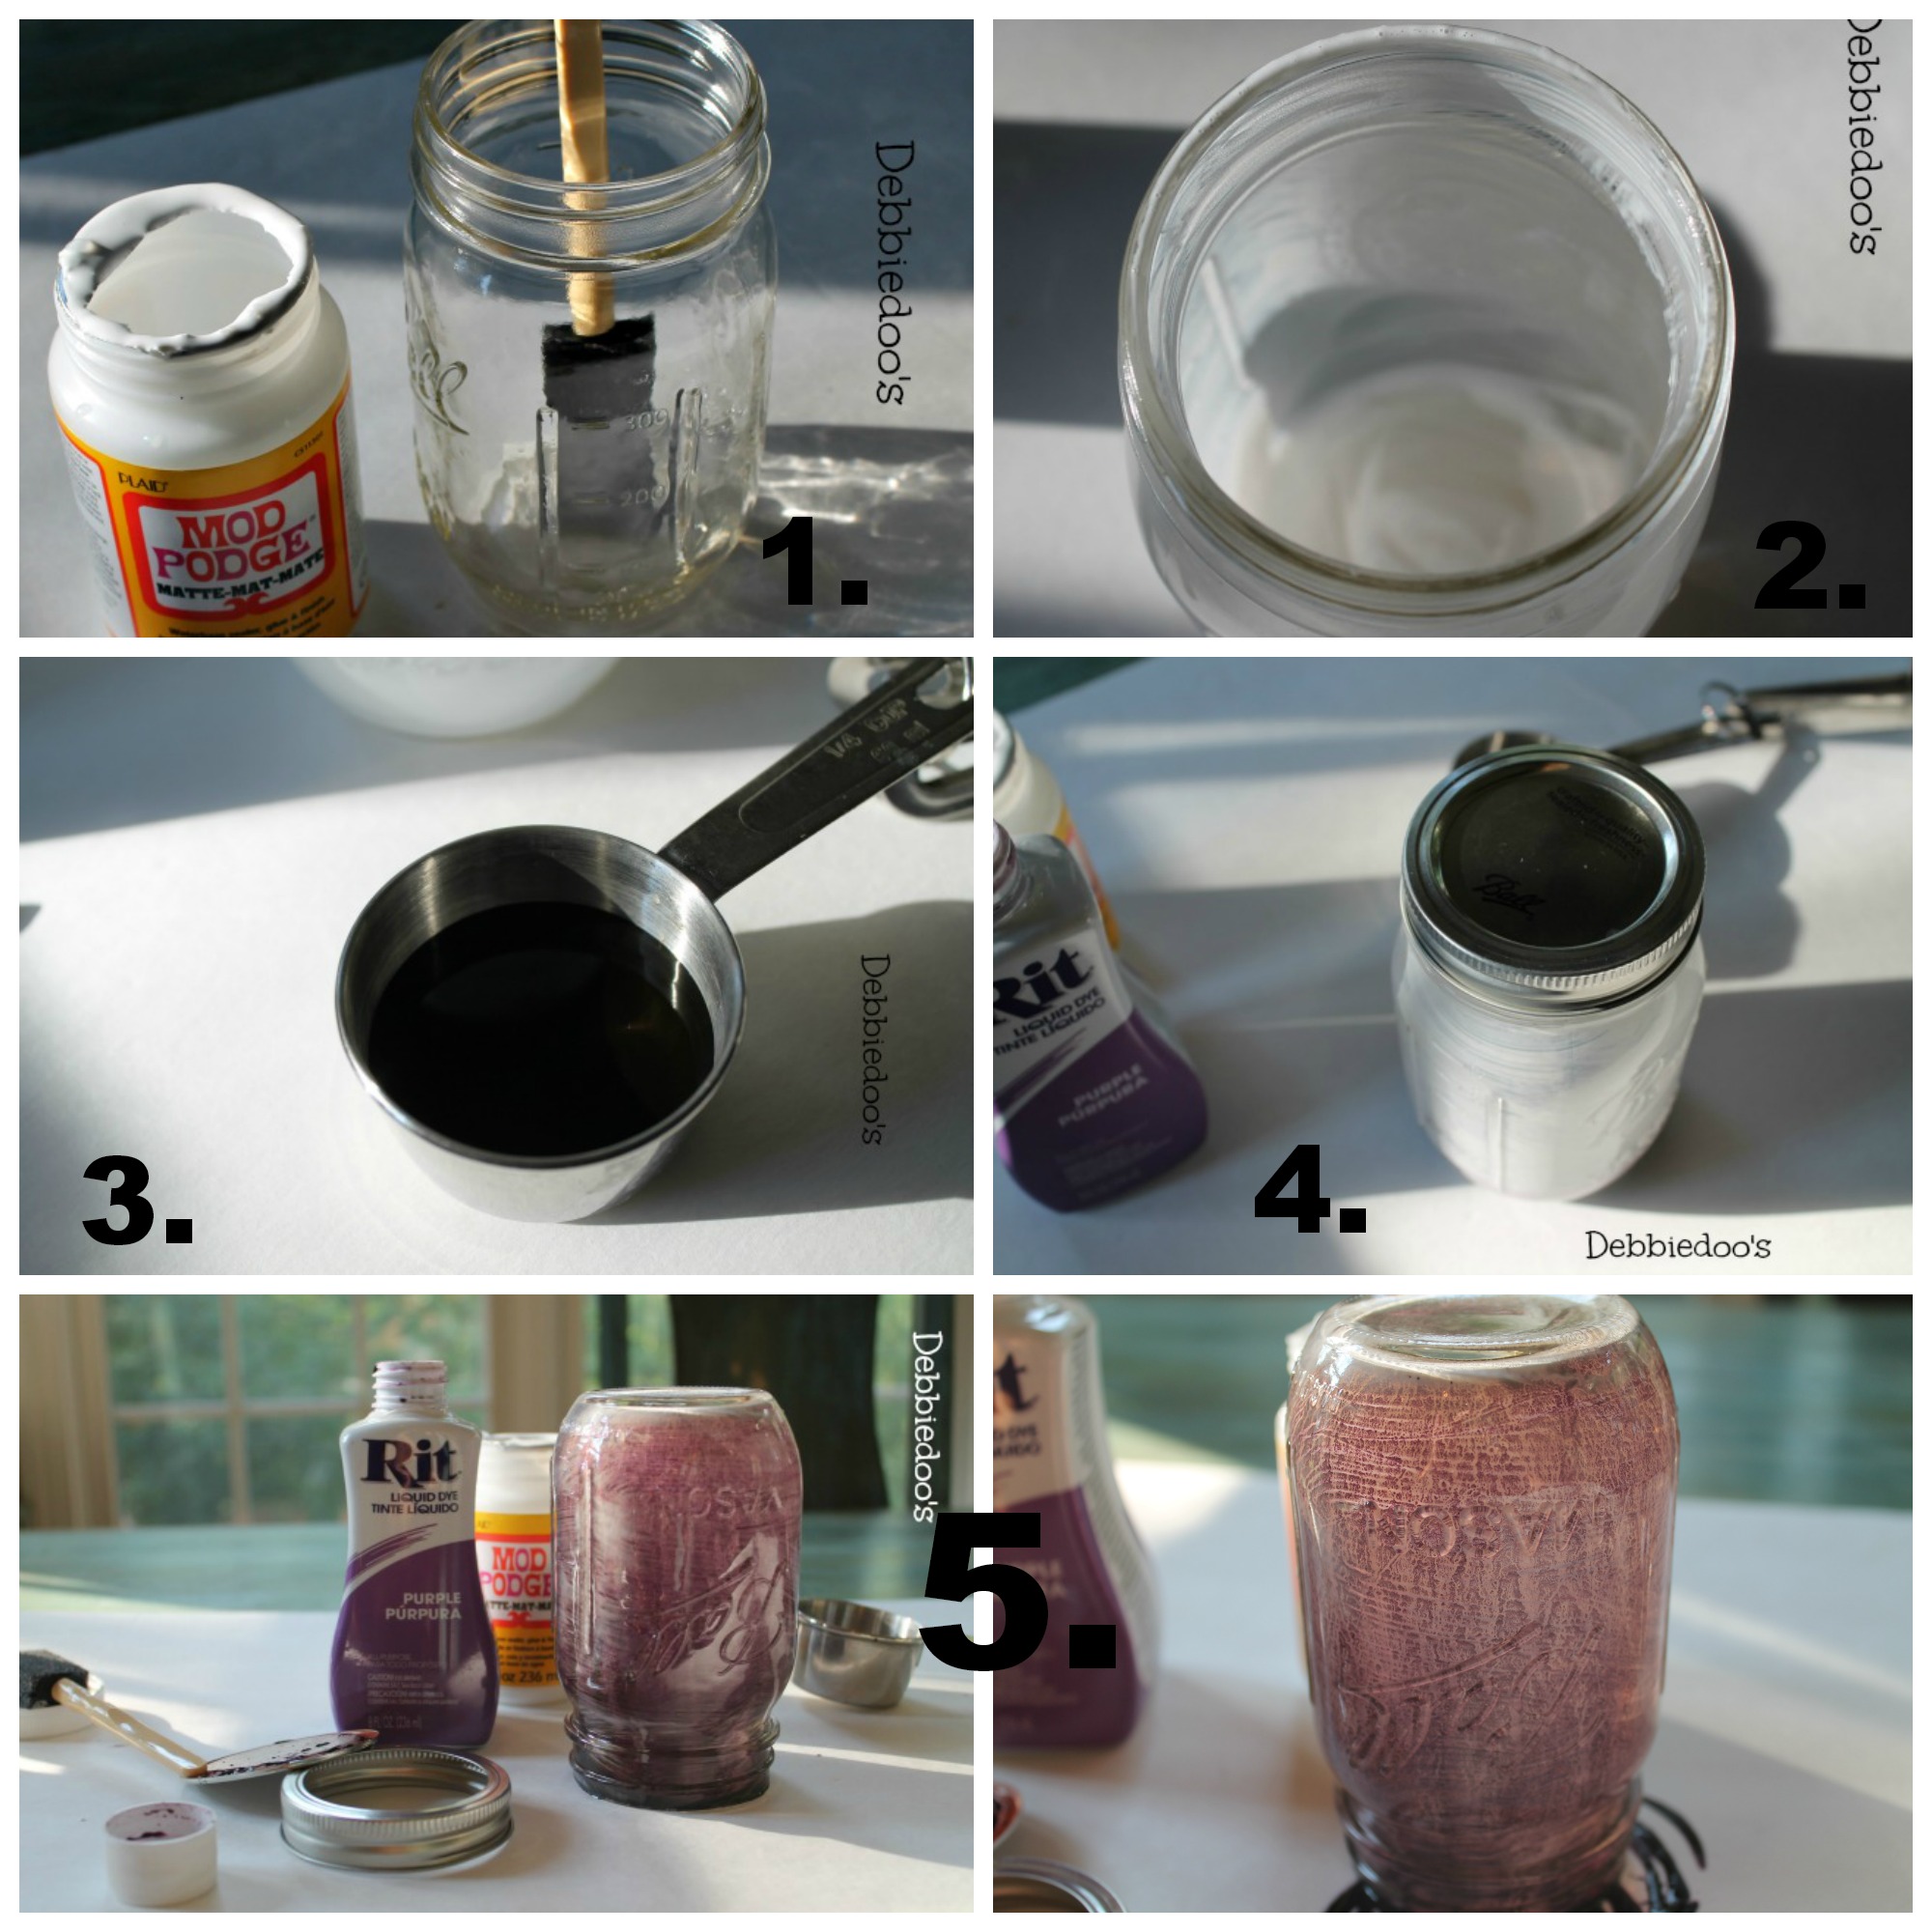 Step by step tutorial on how to inside out glass with rit dye and mod podge